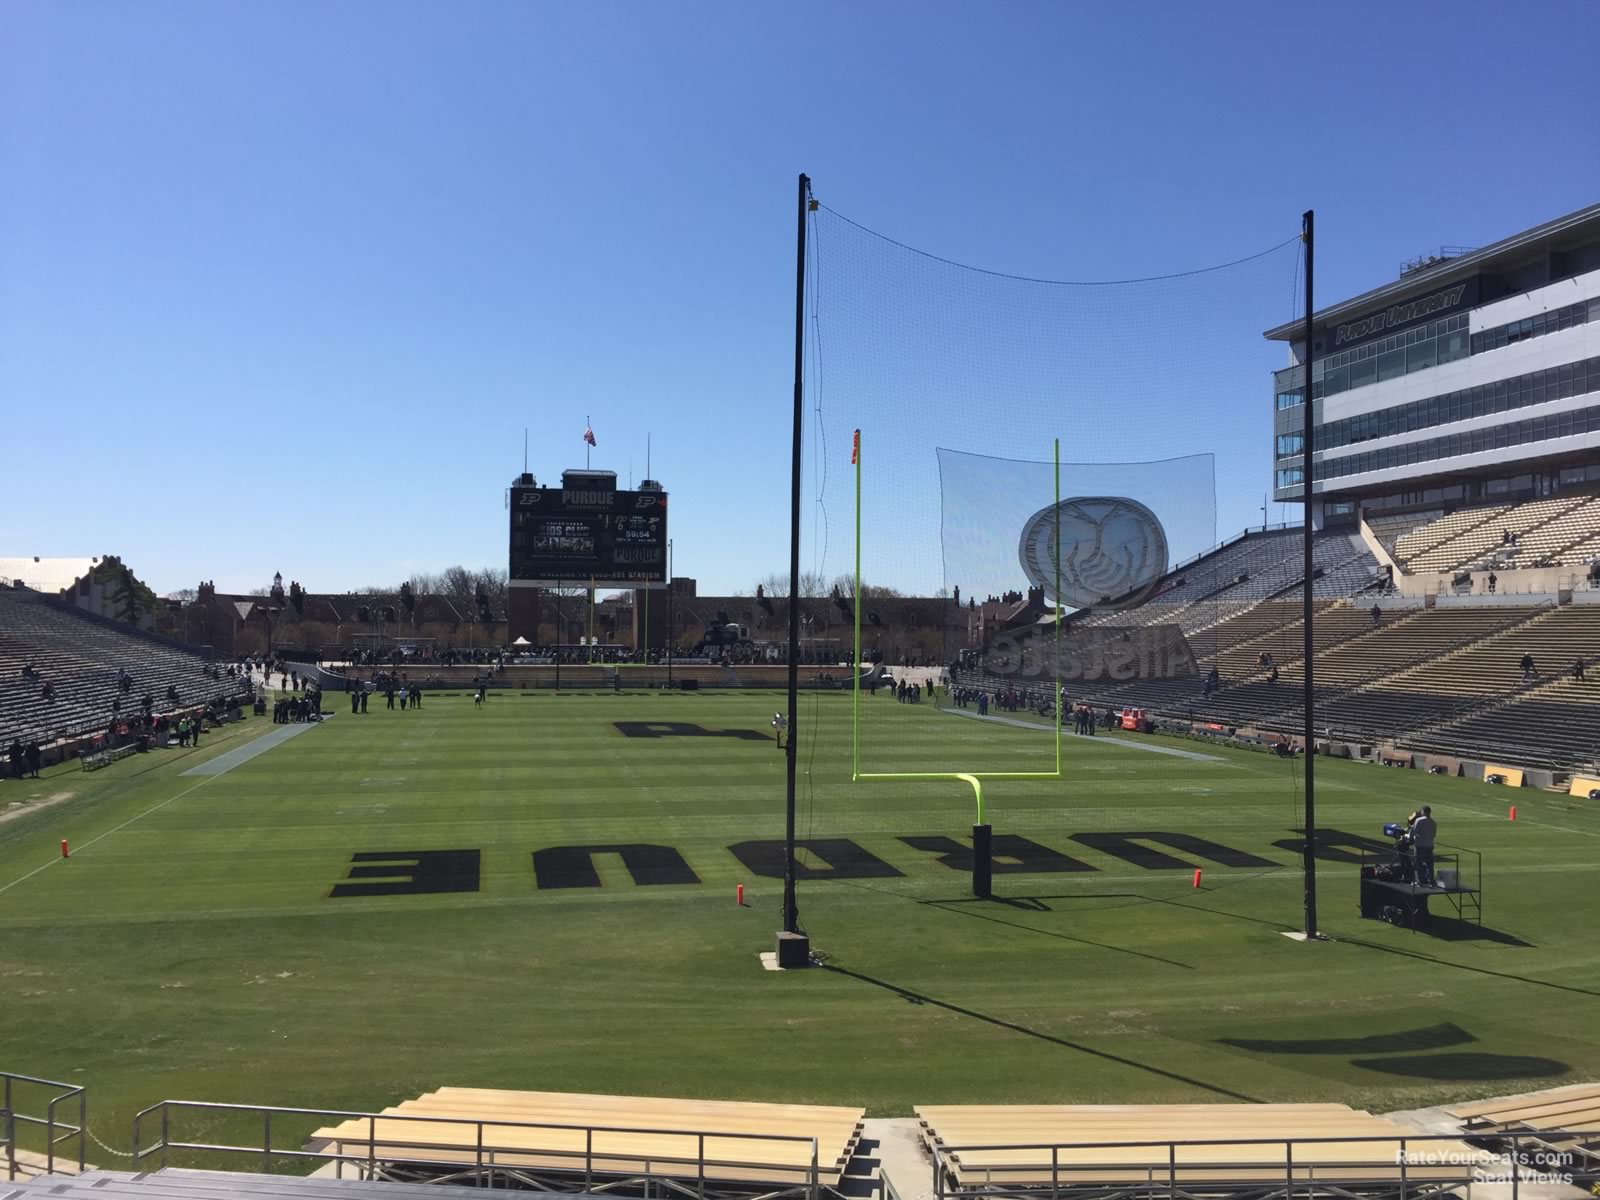 section 114, row 24 seat view  - ross-ade stadium